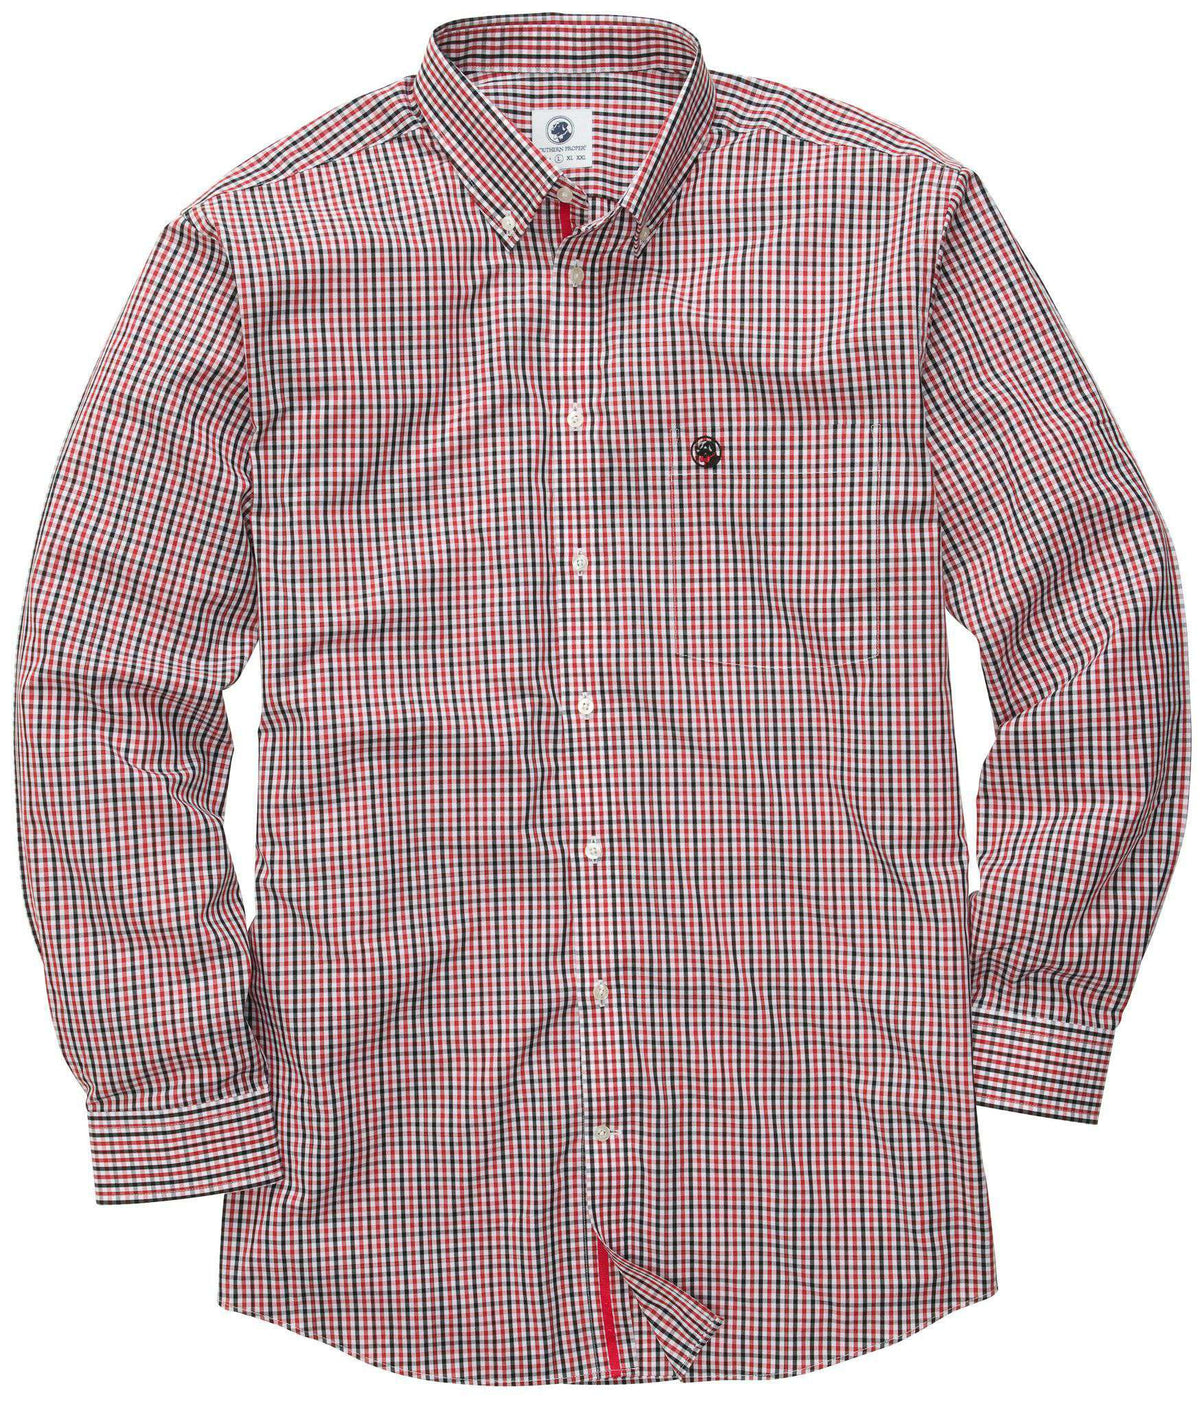 Goal Line Shirt in Red & Black Check by Southern Proper - Country Club Prep